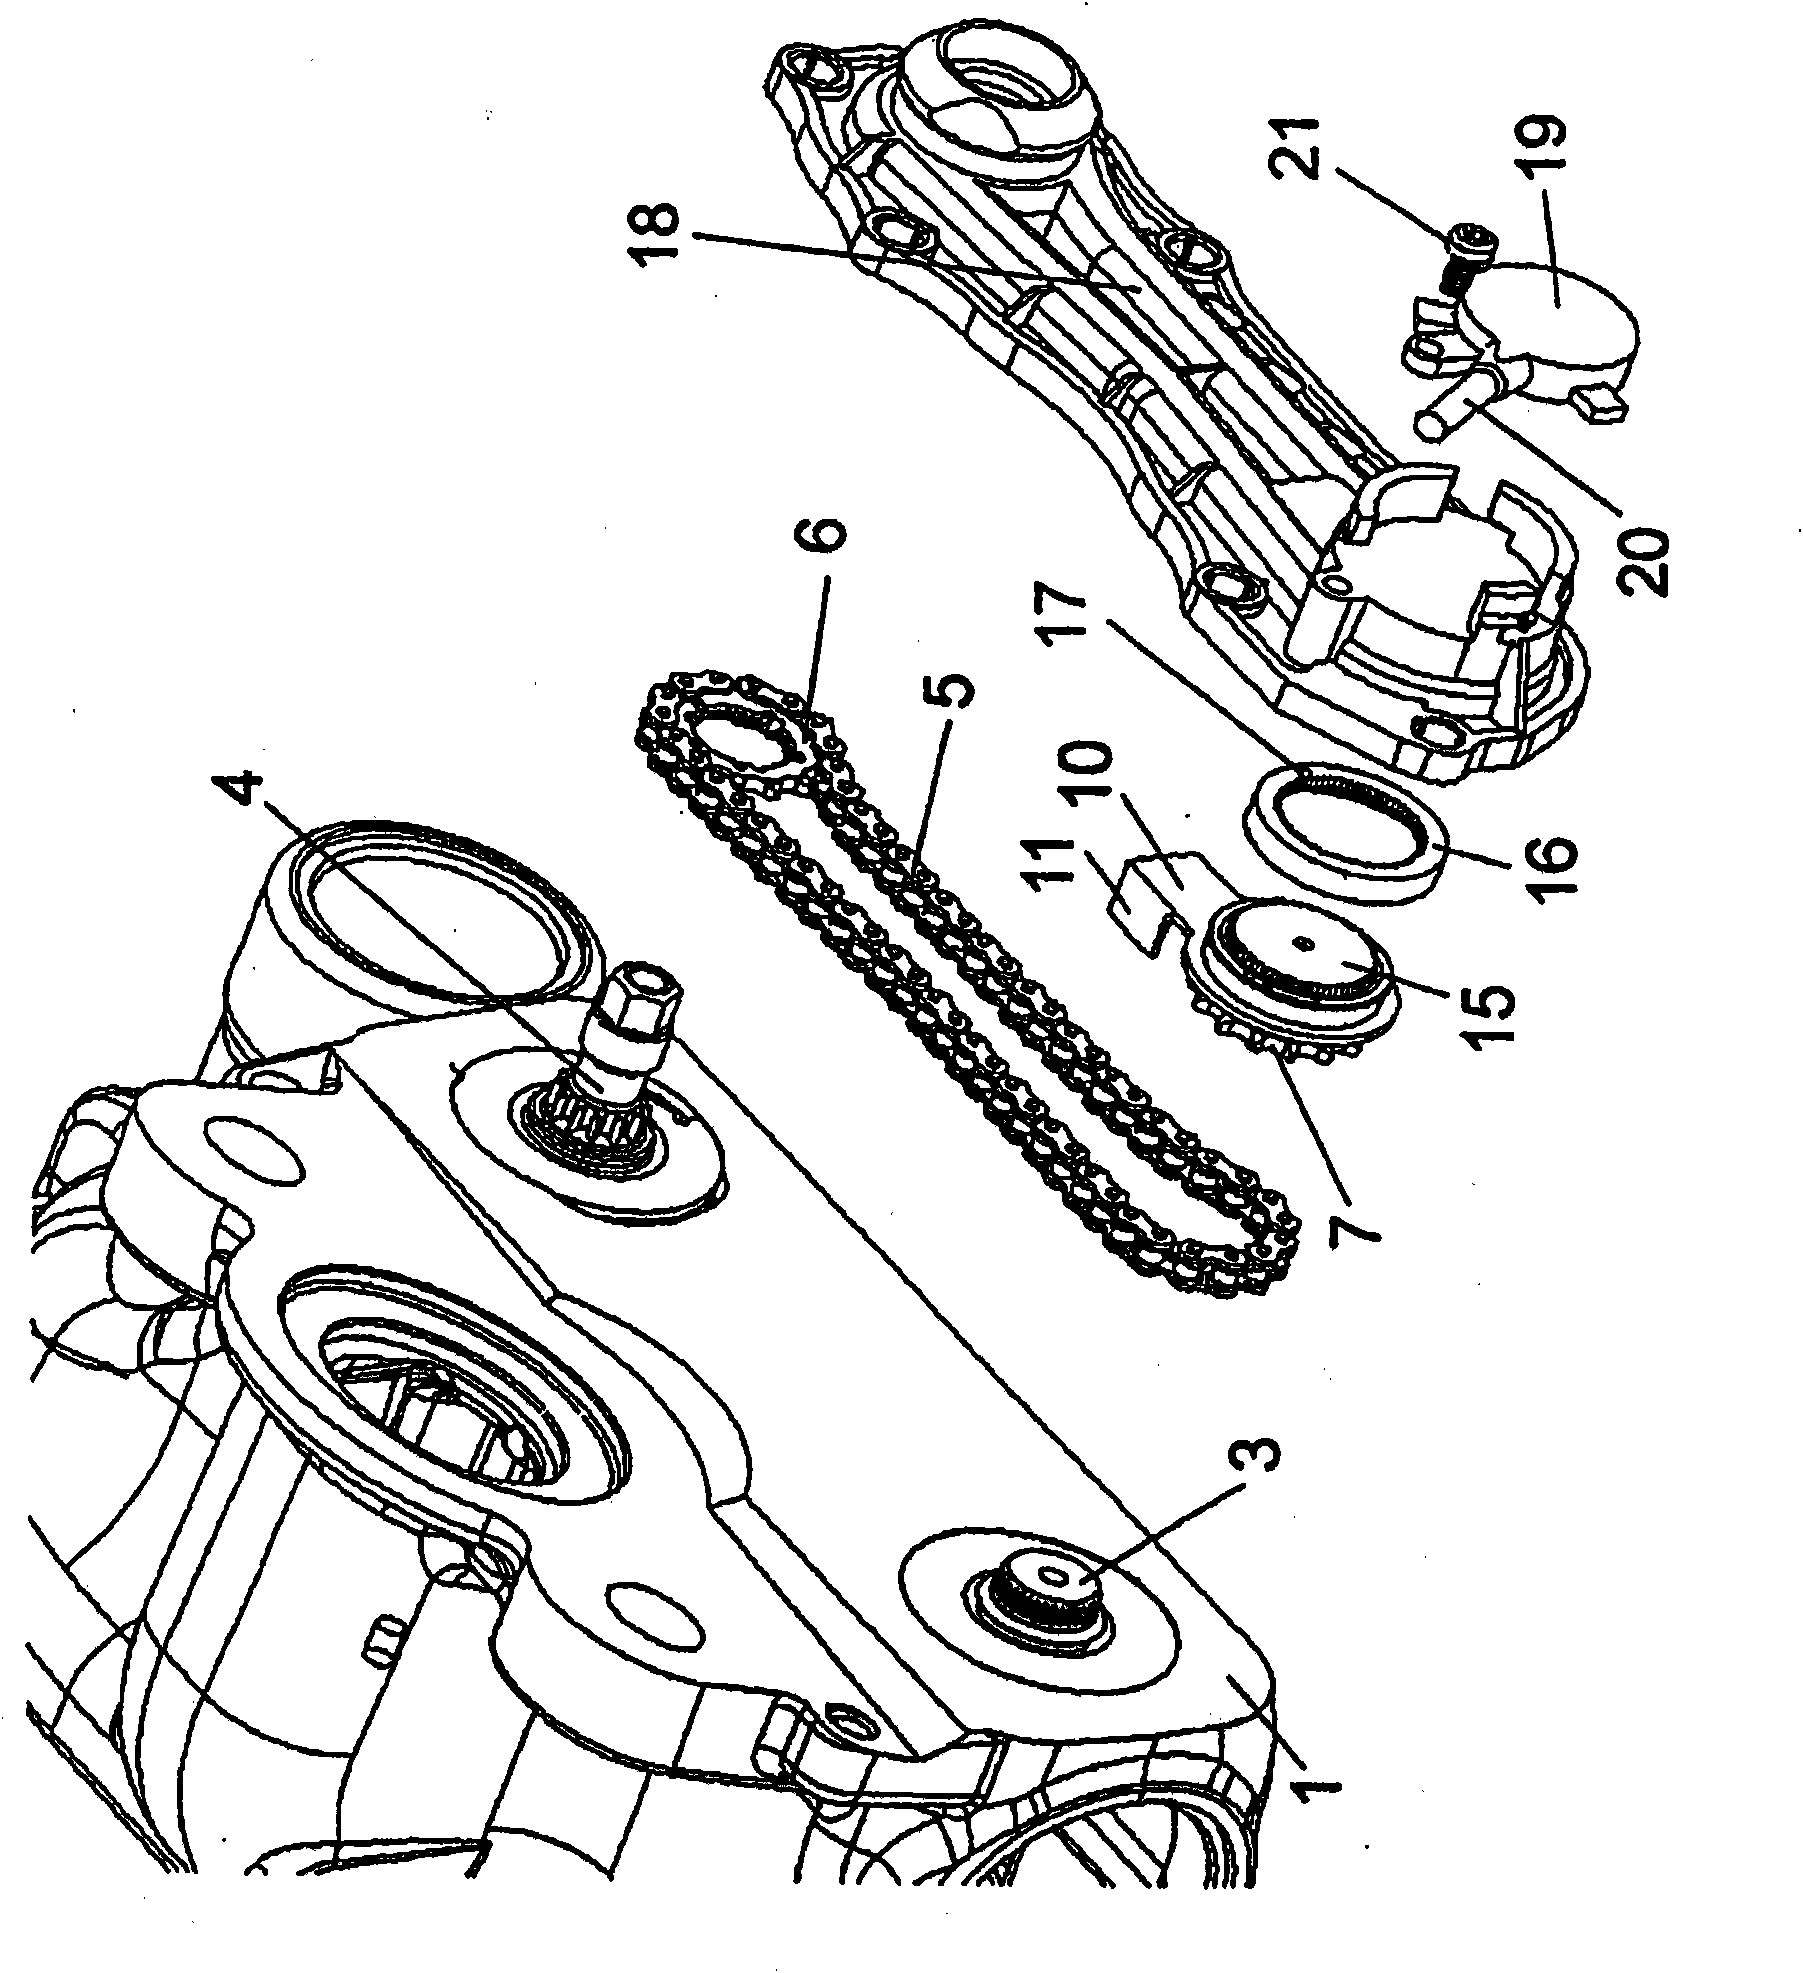 Disc brake, in particlar for a utility vehicle